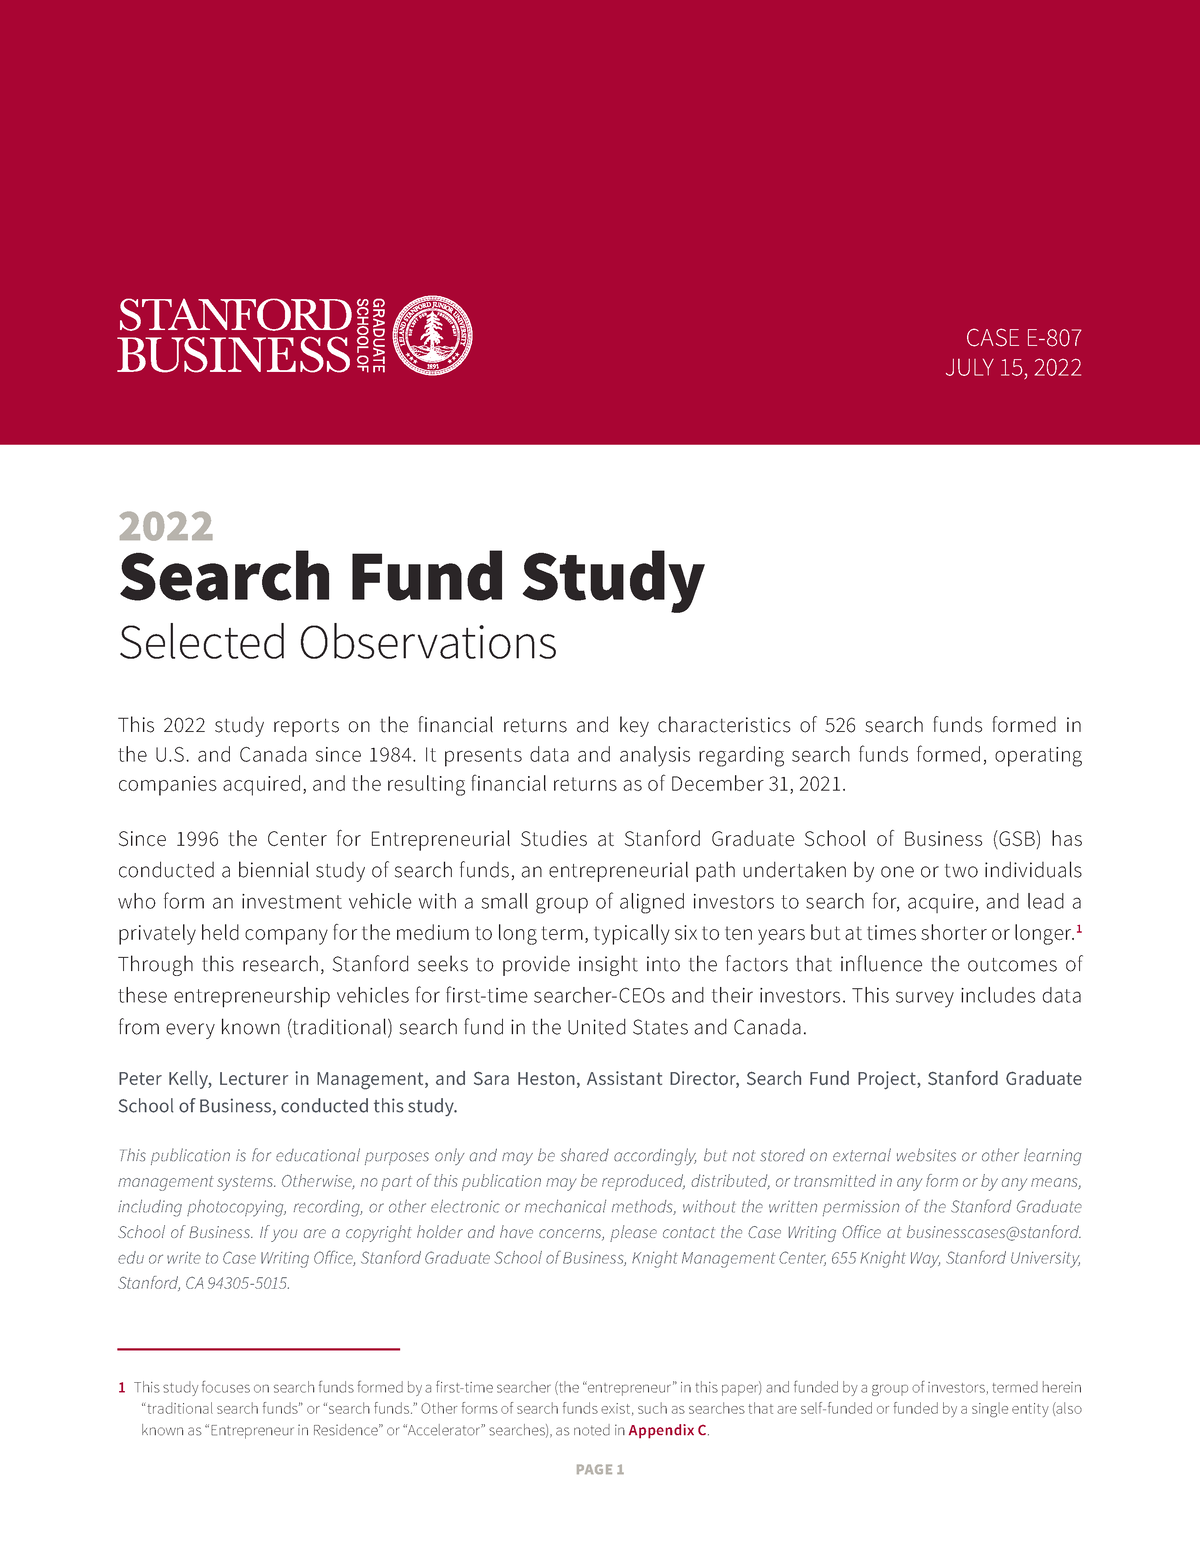 Search fund study 2022 Search Fund Study Selected Observations CASE E